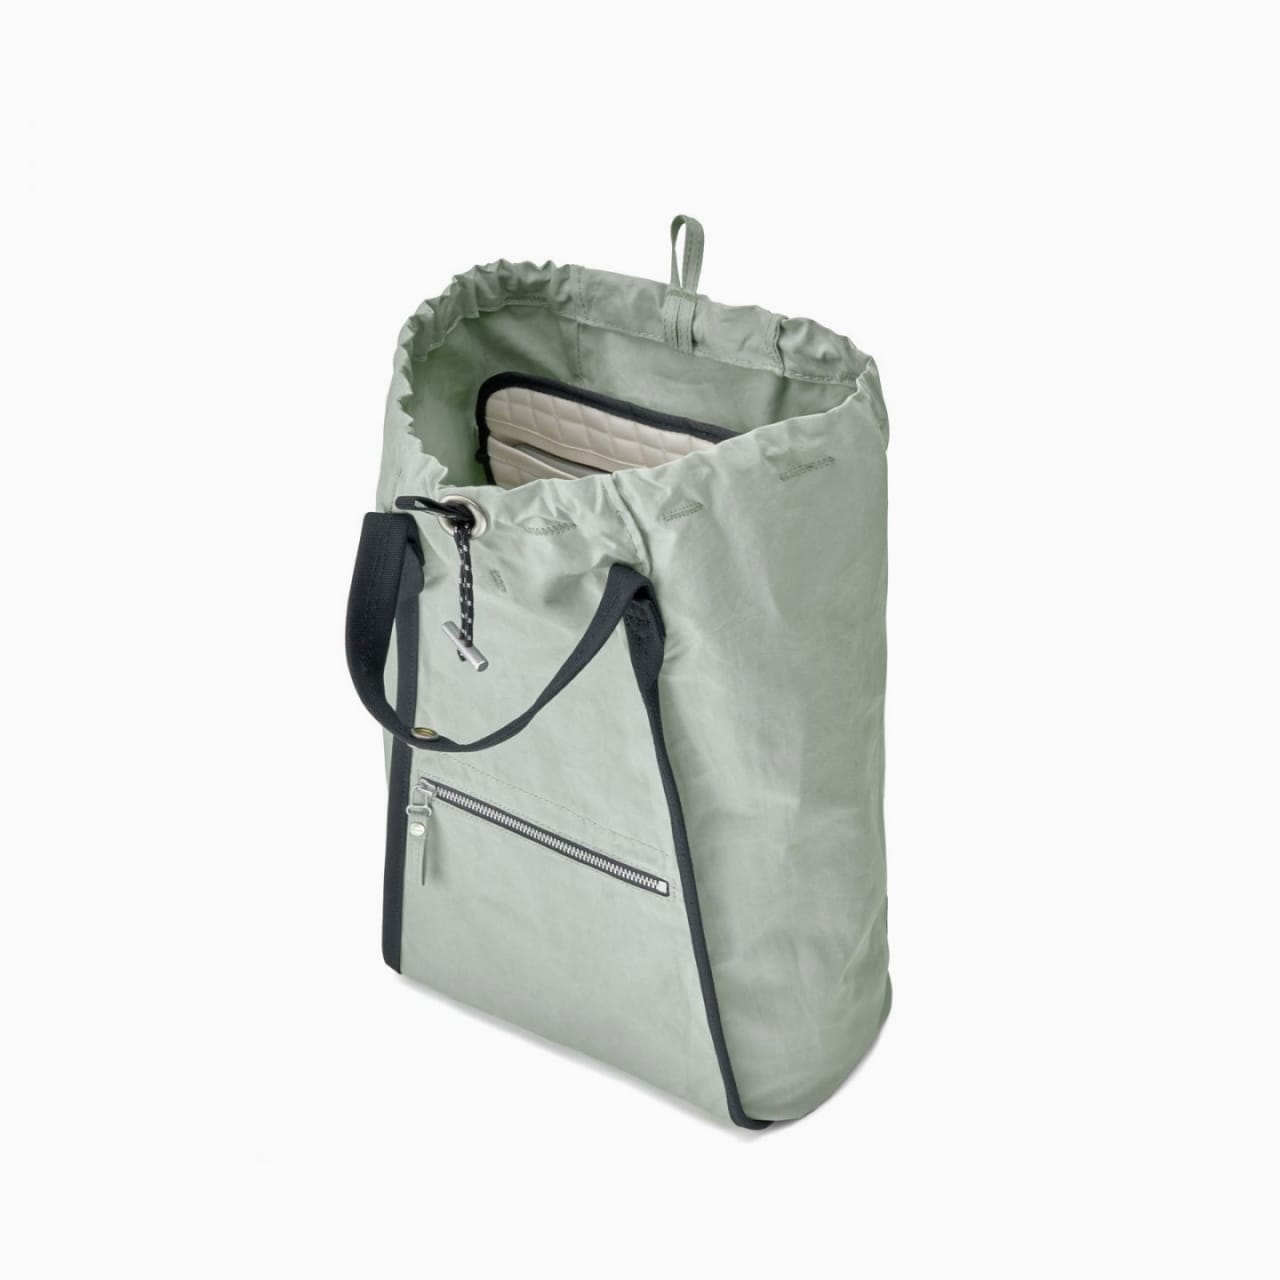 Interior of light green canvas bag with padded laptop sleeve and internal organization pouch.